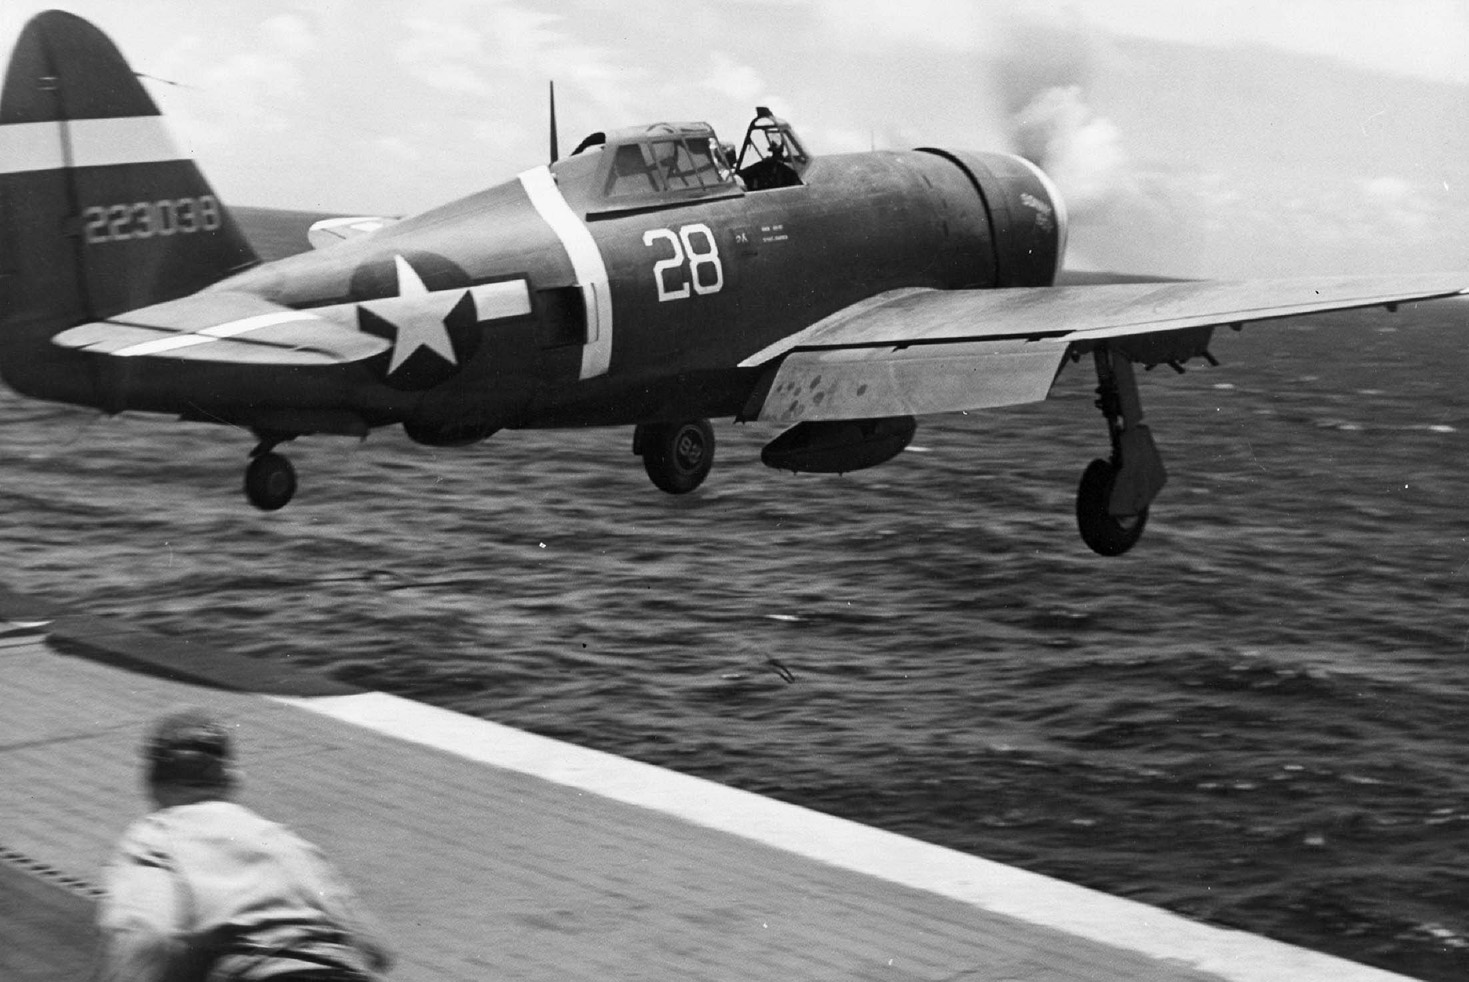 This P-47D flies off the deck of the escort carrier USS Manila Bay to attack an approaching formation of Japanese Aichi Val dive bombers east of the island of Saipan in the Marianas.